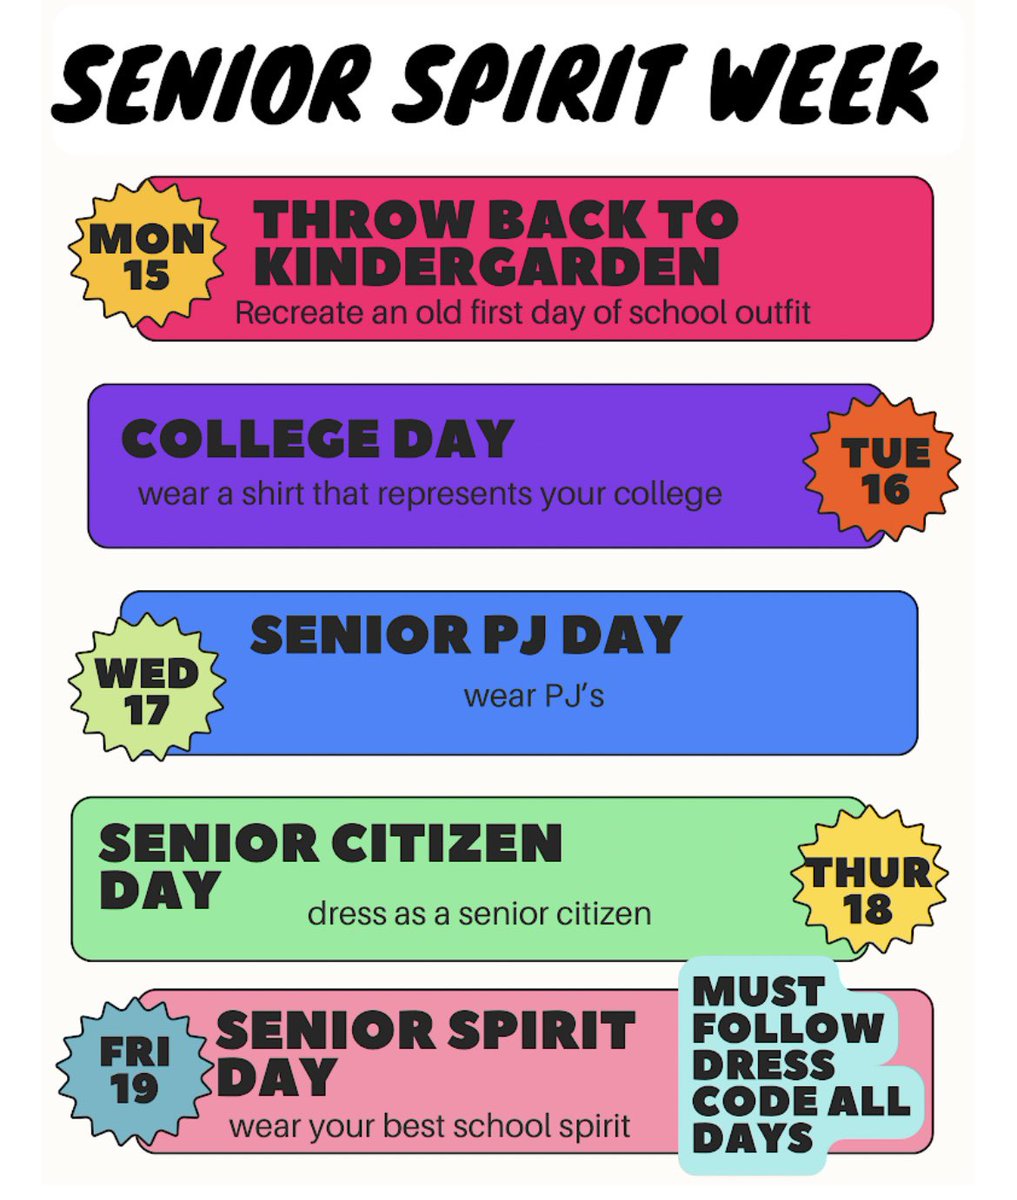 Senior spirit week starts tomorrow. Please remember that you need to follow dress code expectations each day.